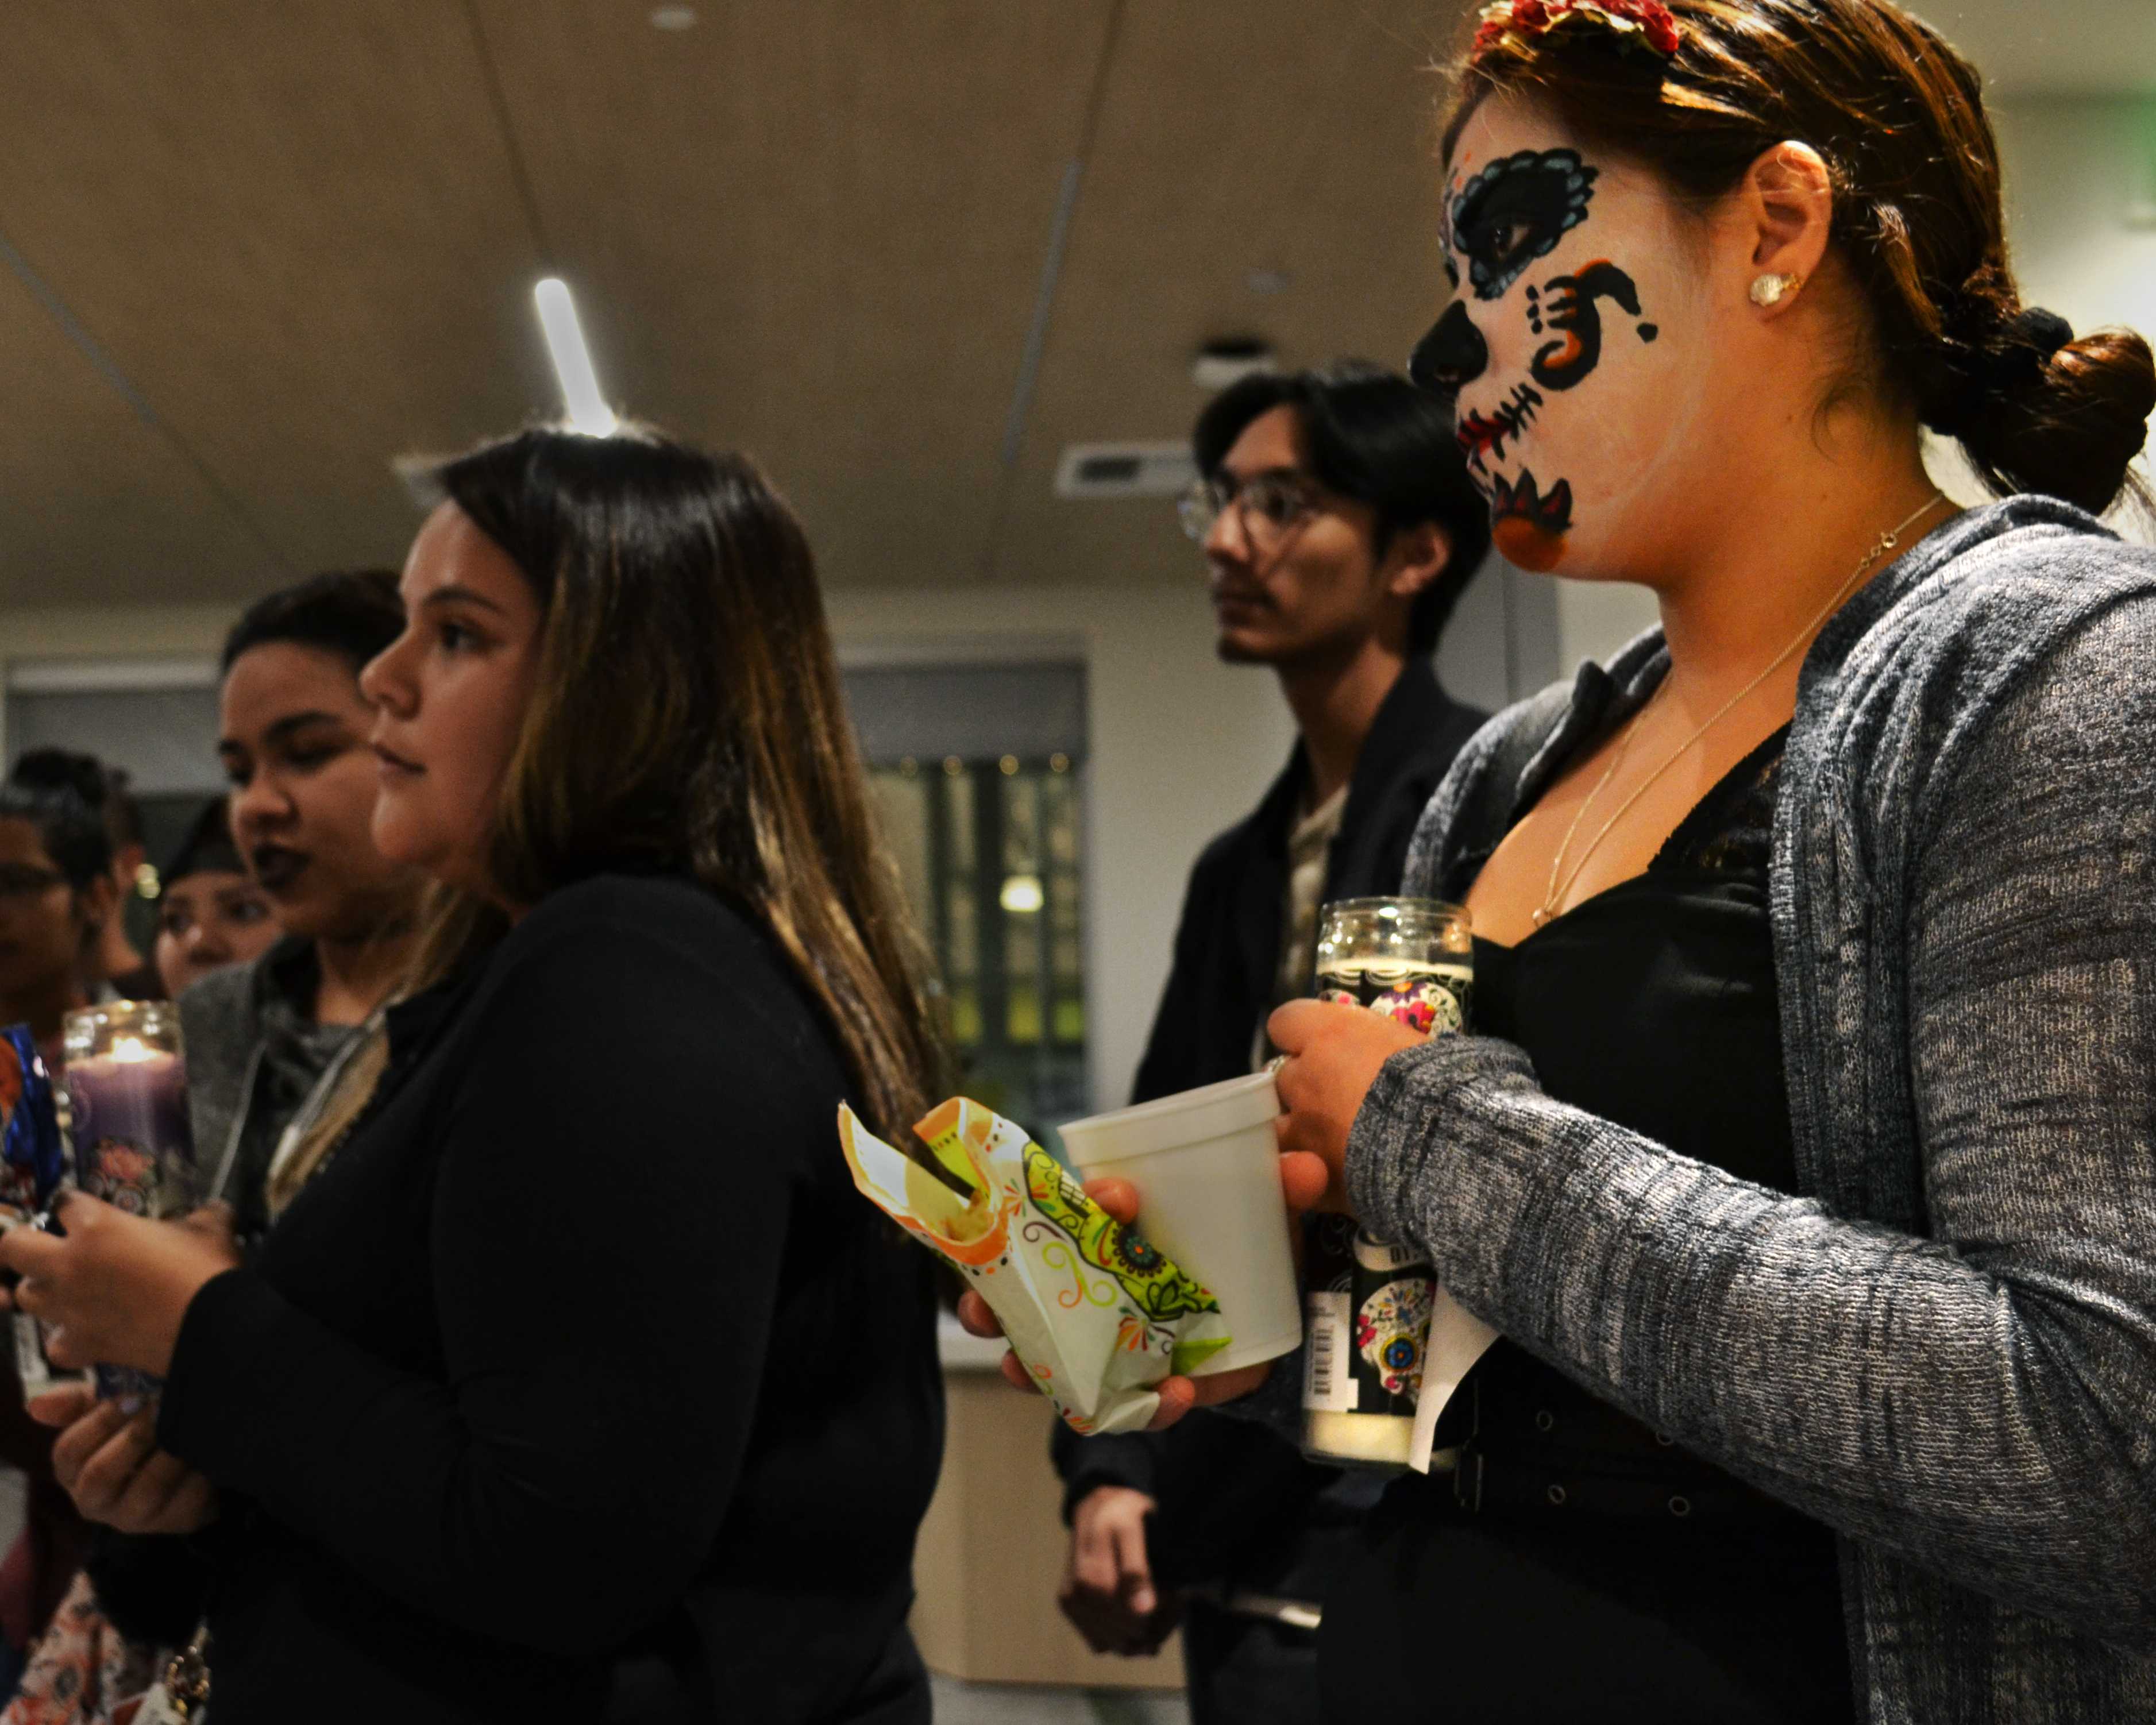 CSUN students gather for Day of the Dead celebration holding candles and donning skull makeup